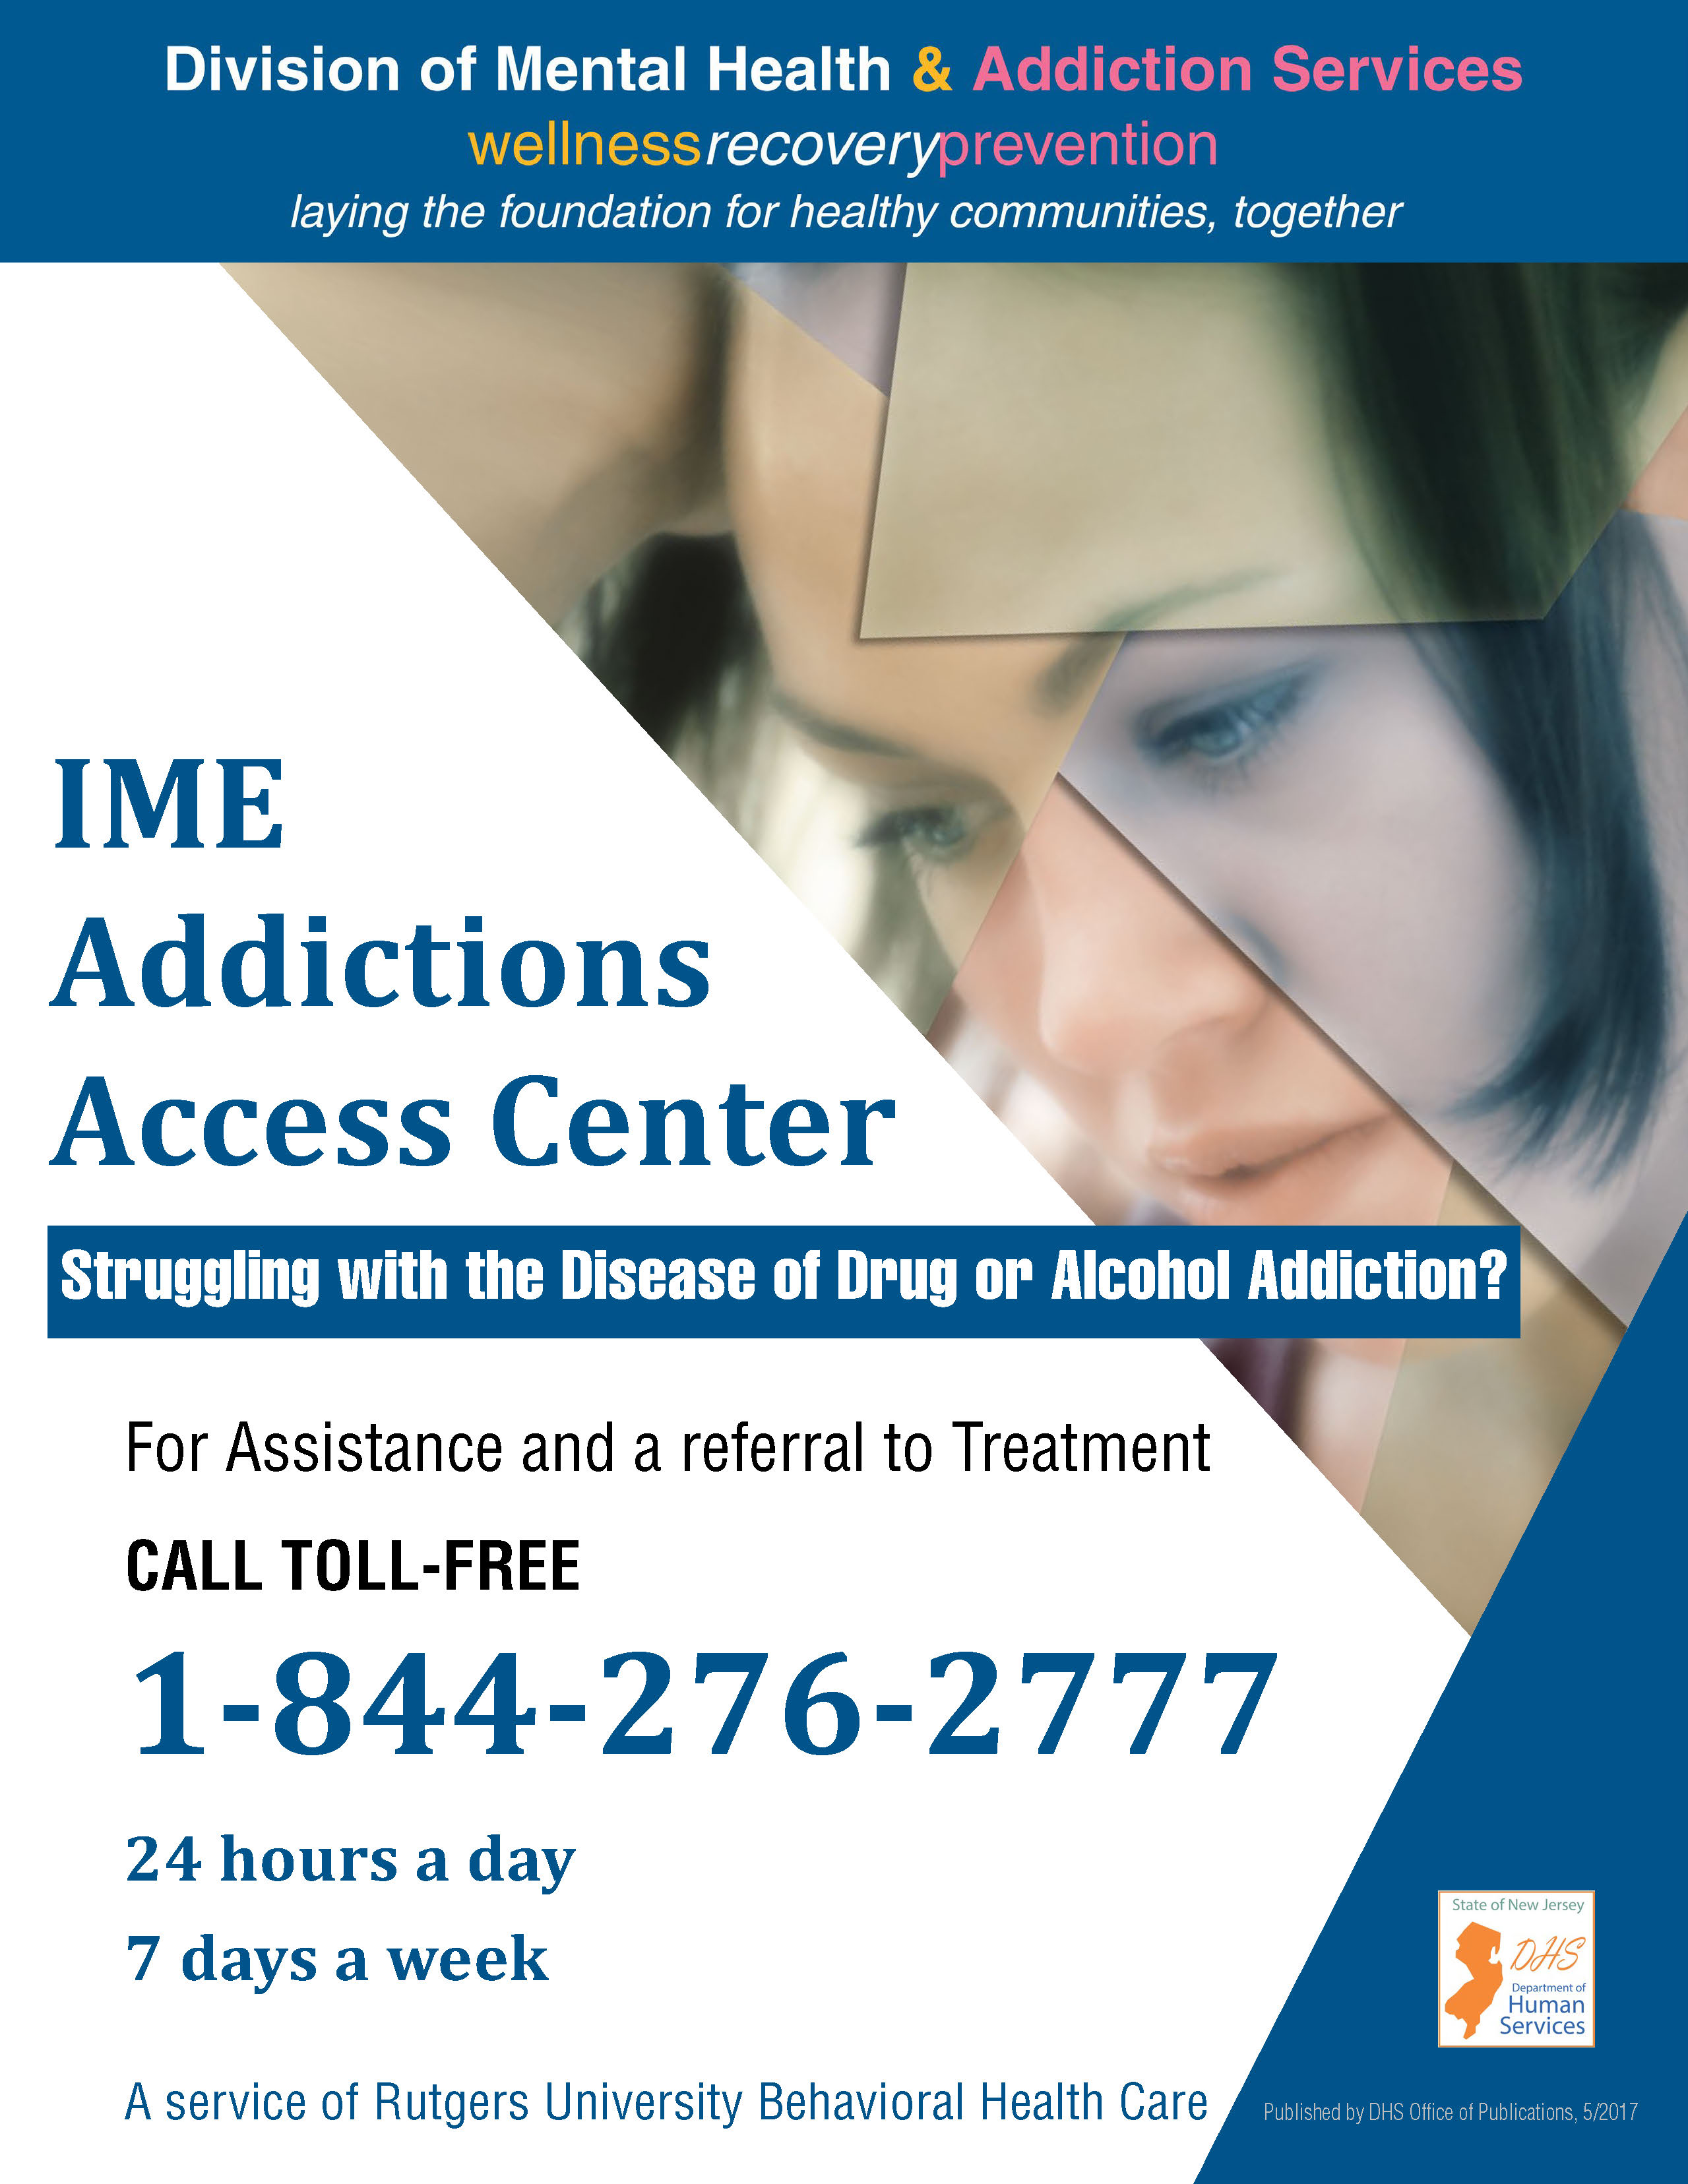 New Jersey substance abuse prevention